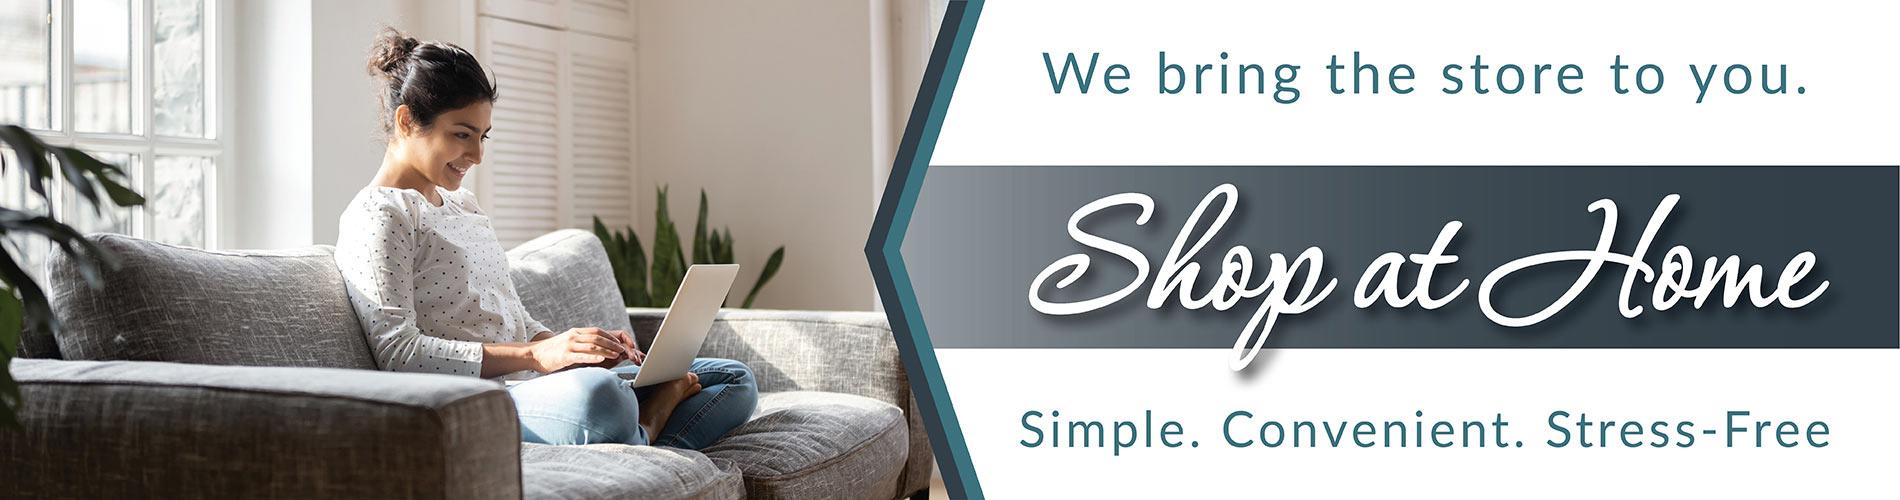 Shop at home - let us bring the store to you - Simple. Convenient. Stress-Free